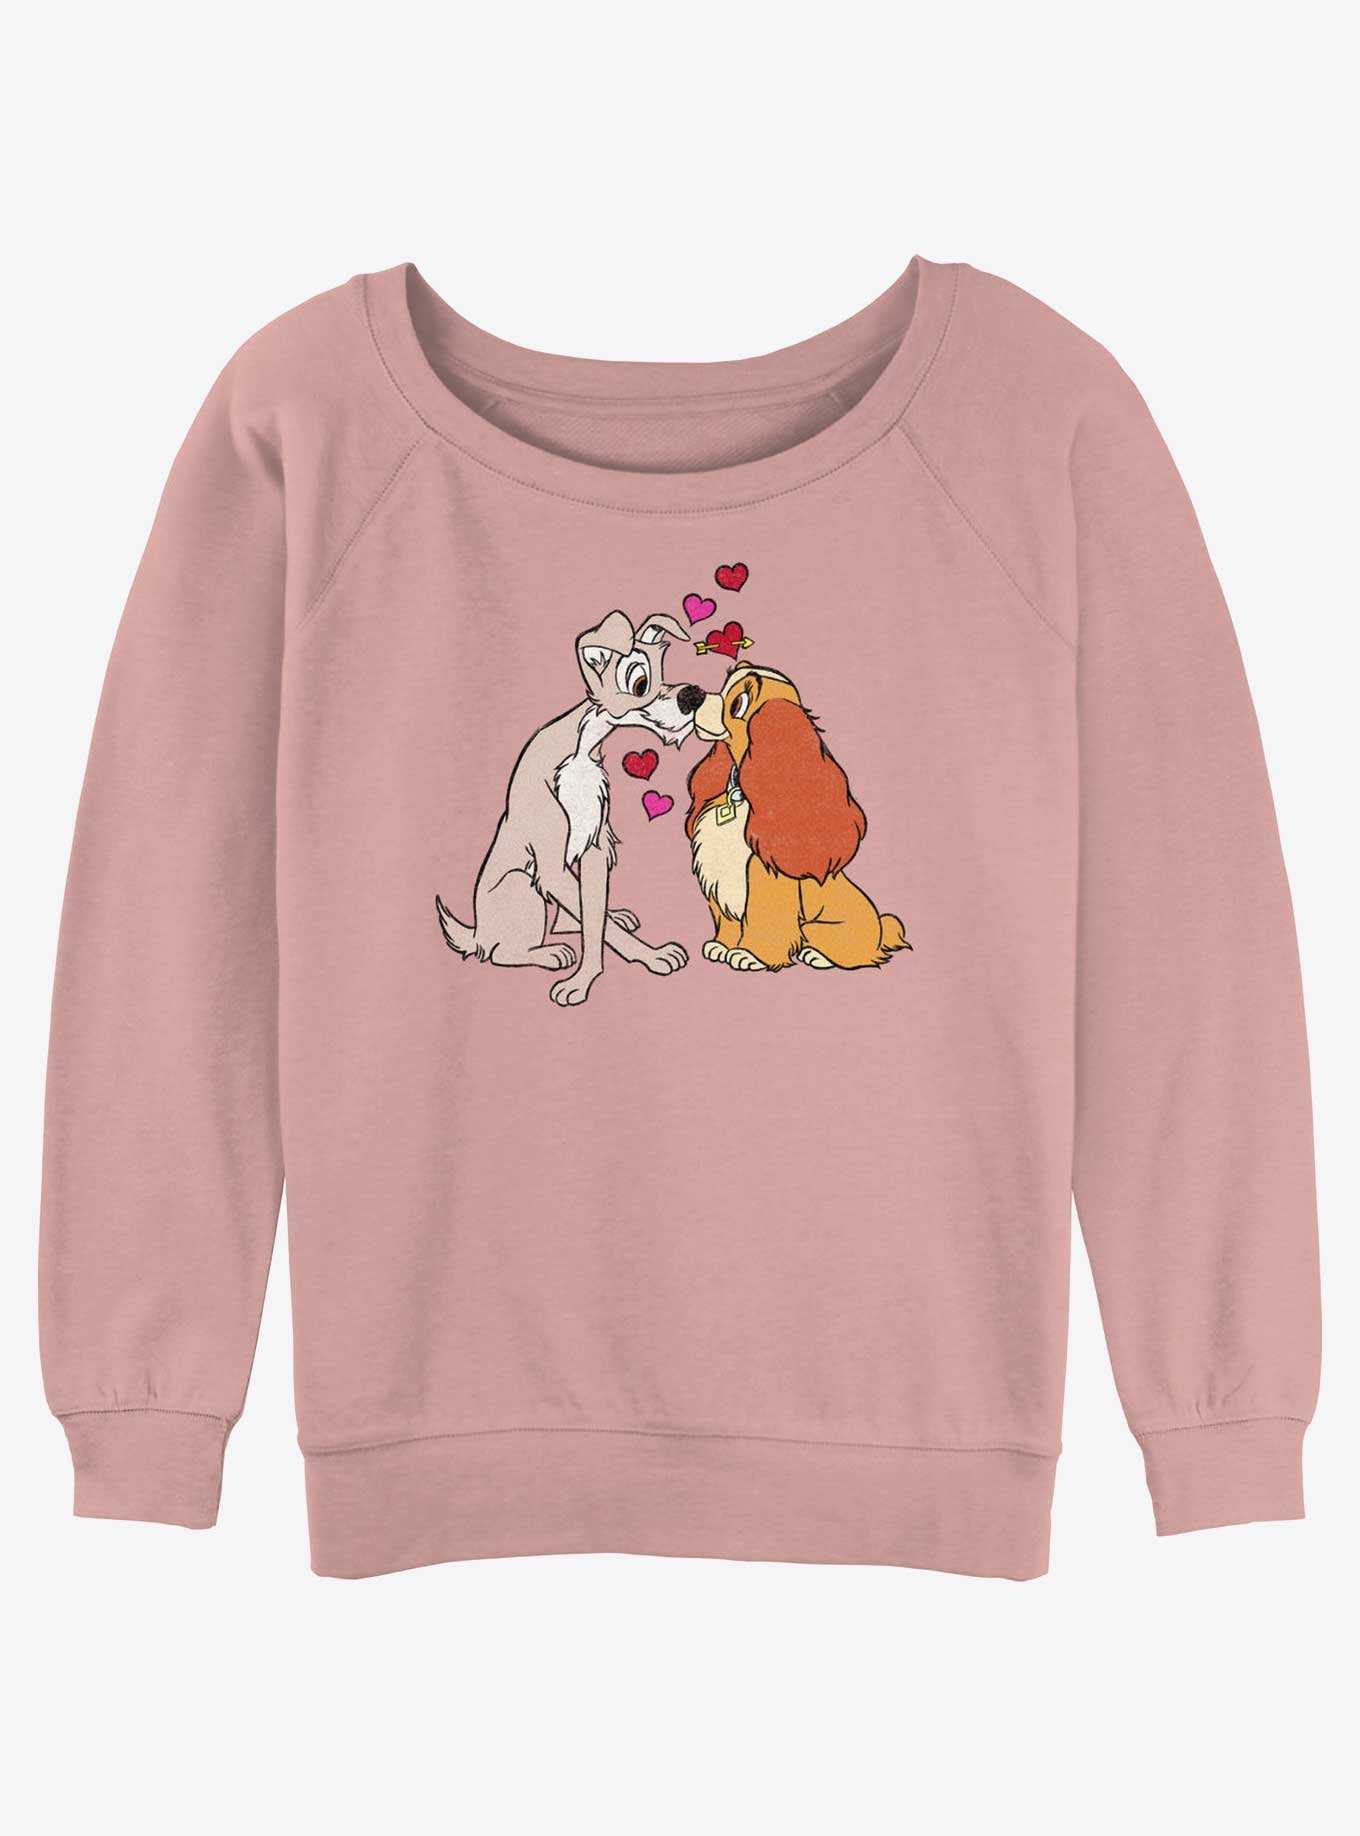 Disney Lady and the Tramp Puppy Love Girls Slouchy Sweatshirt, , hi-res